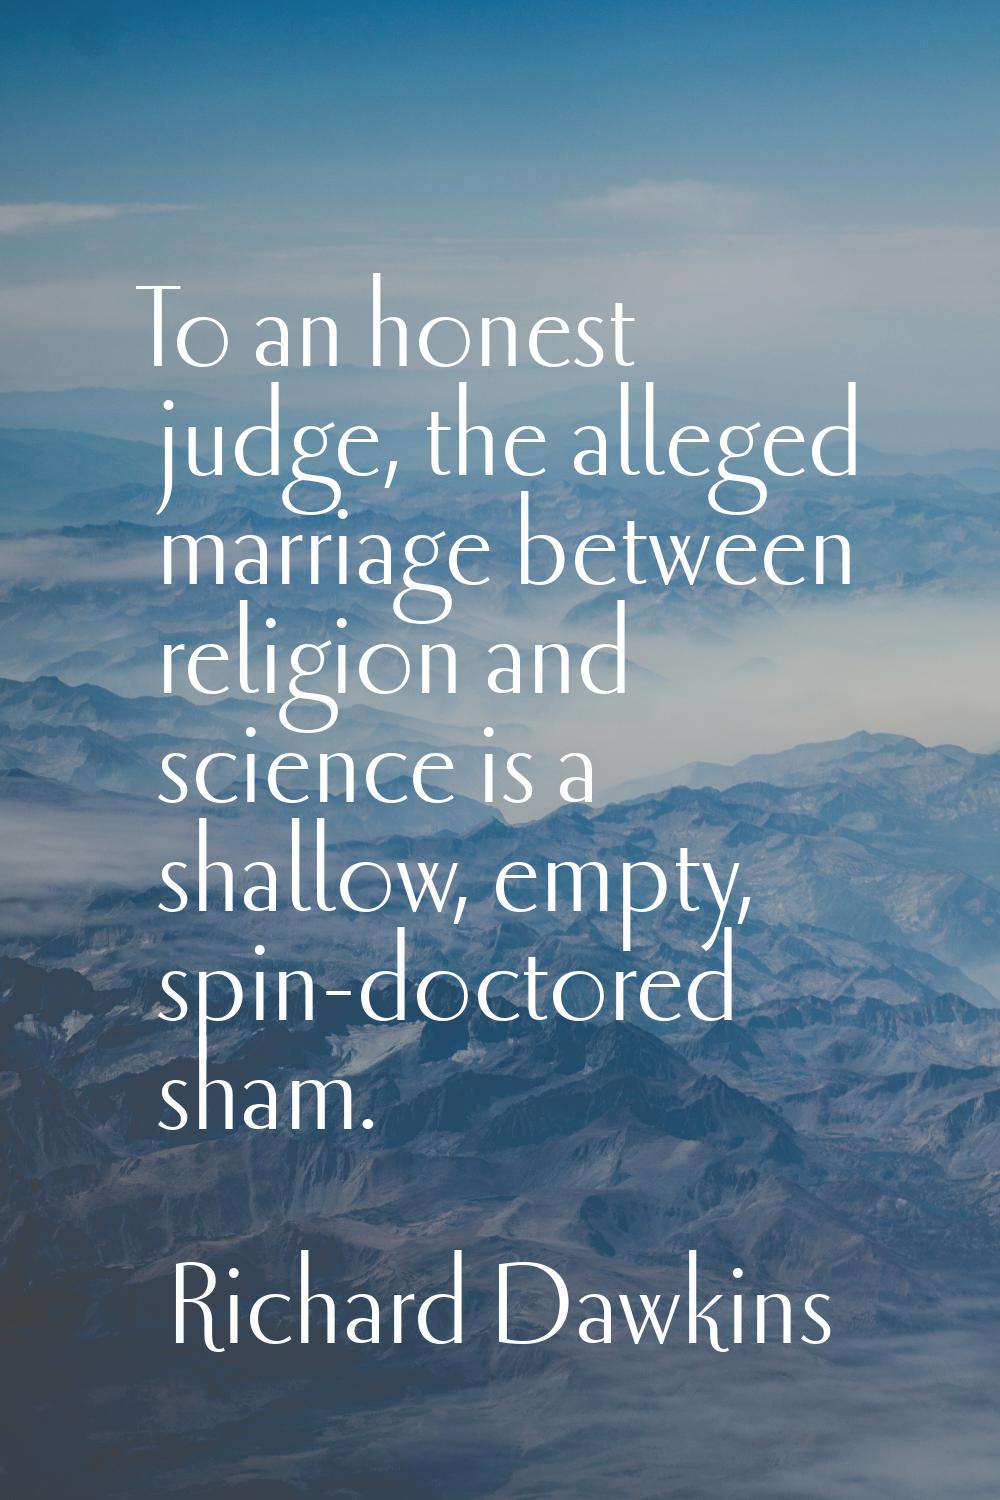 To an honest judge, the alleged marriage between religion and science is a shallow, empty, spin-doc